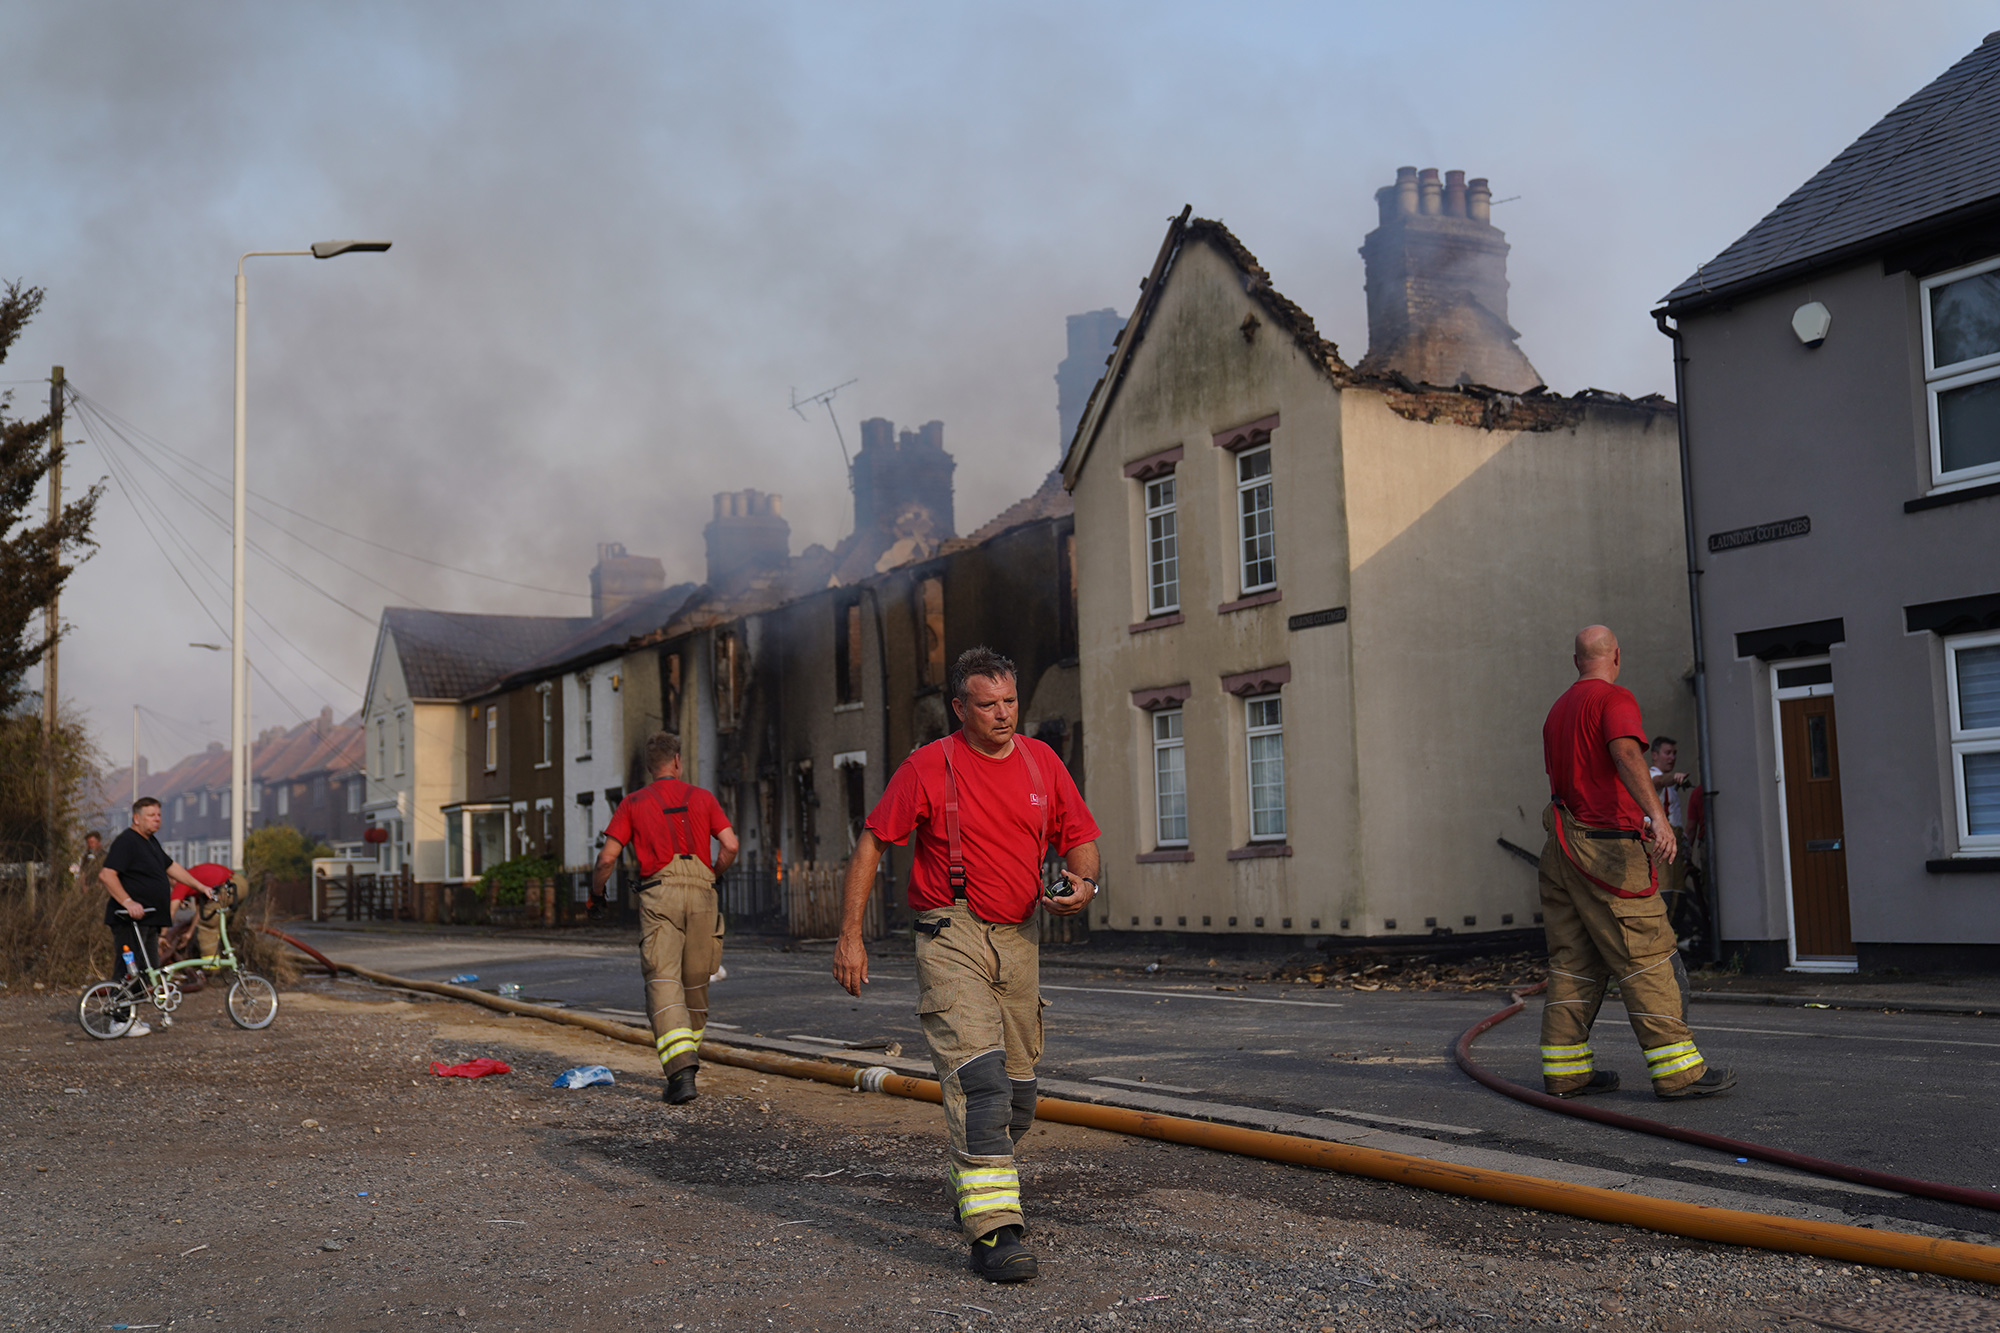 Firefighters at the scene of a blaze in the village of Wennington, located in east London, England, on Tuesday, July 19.